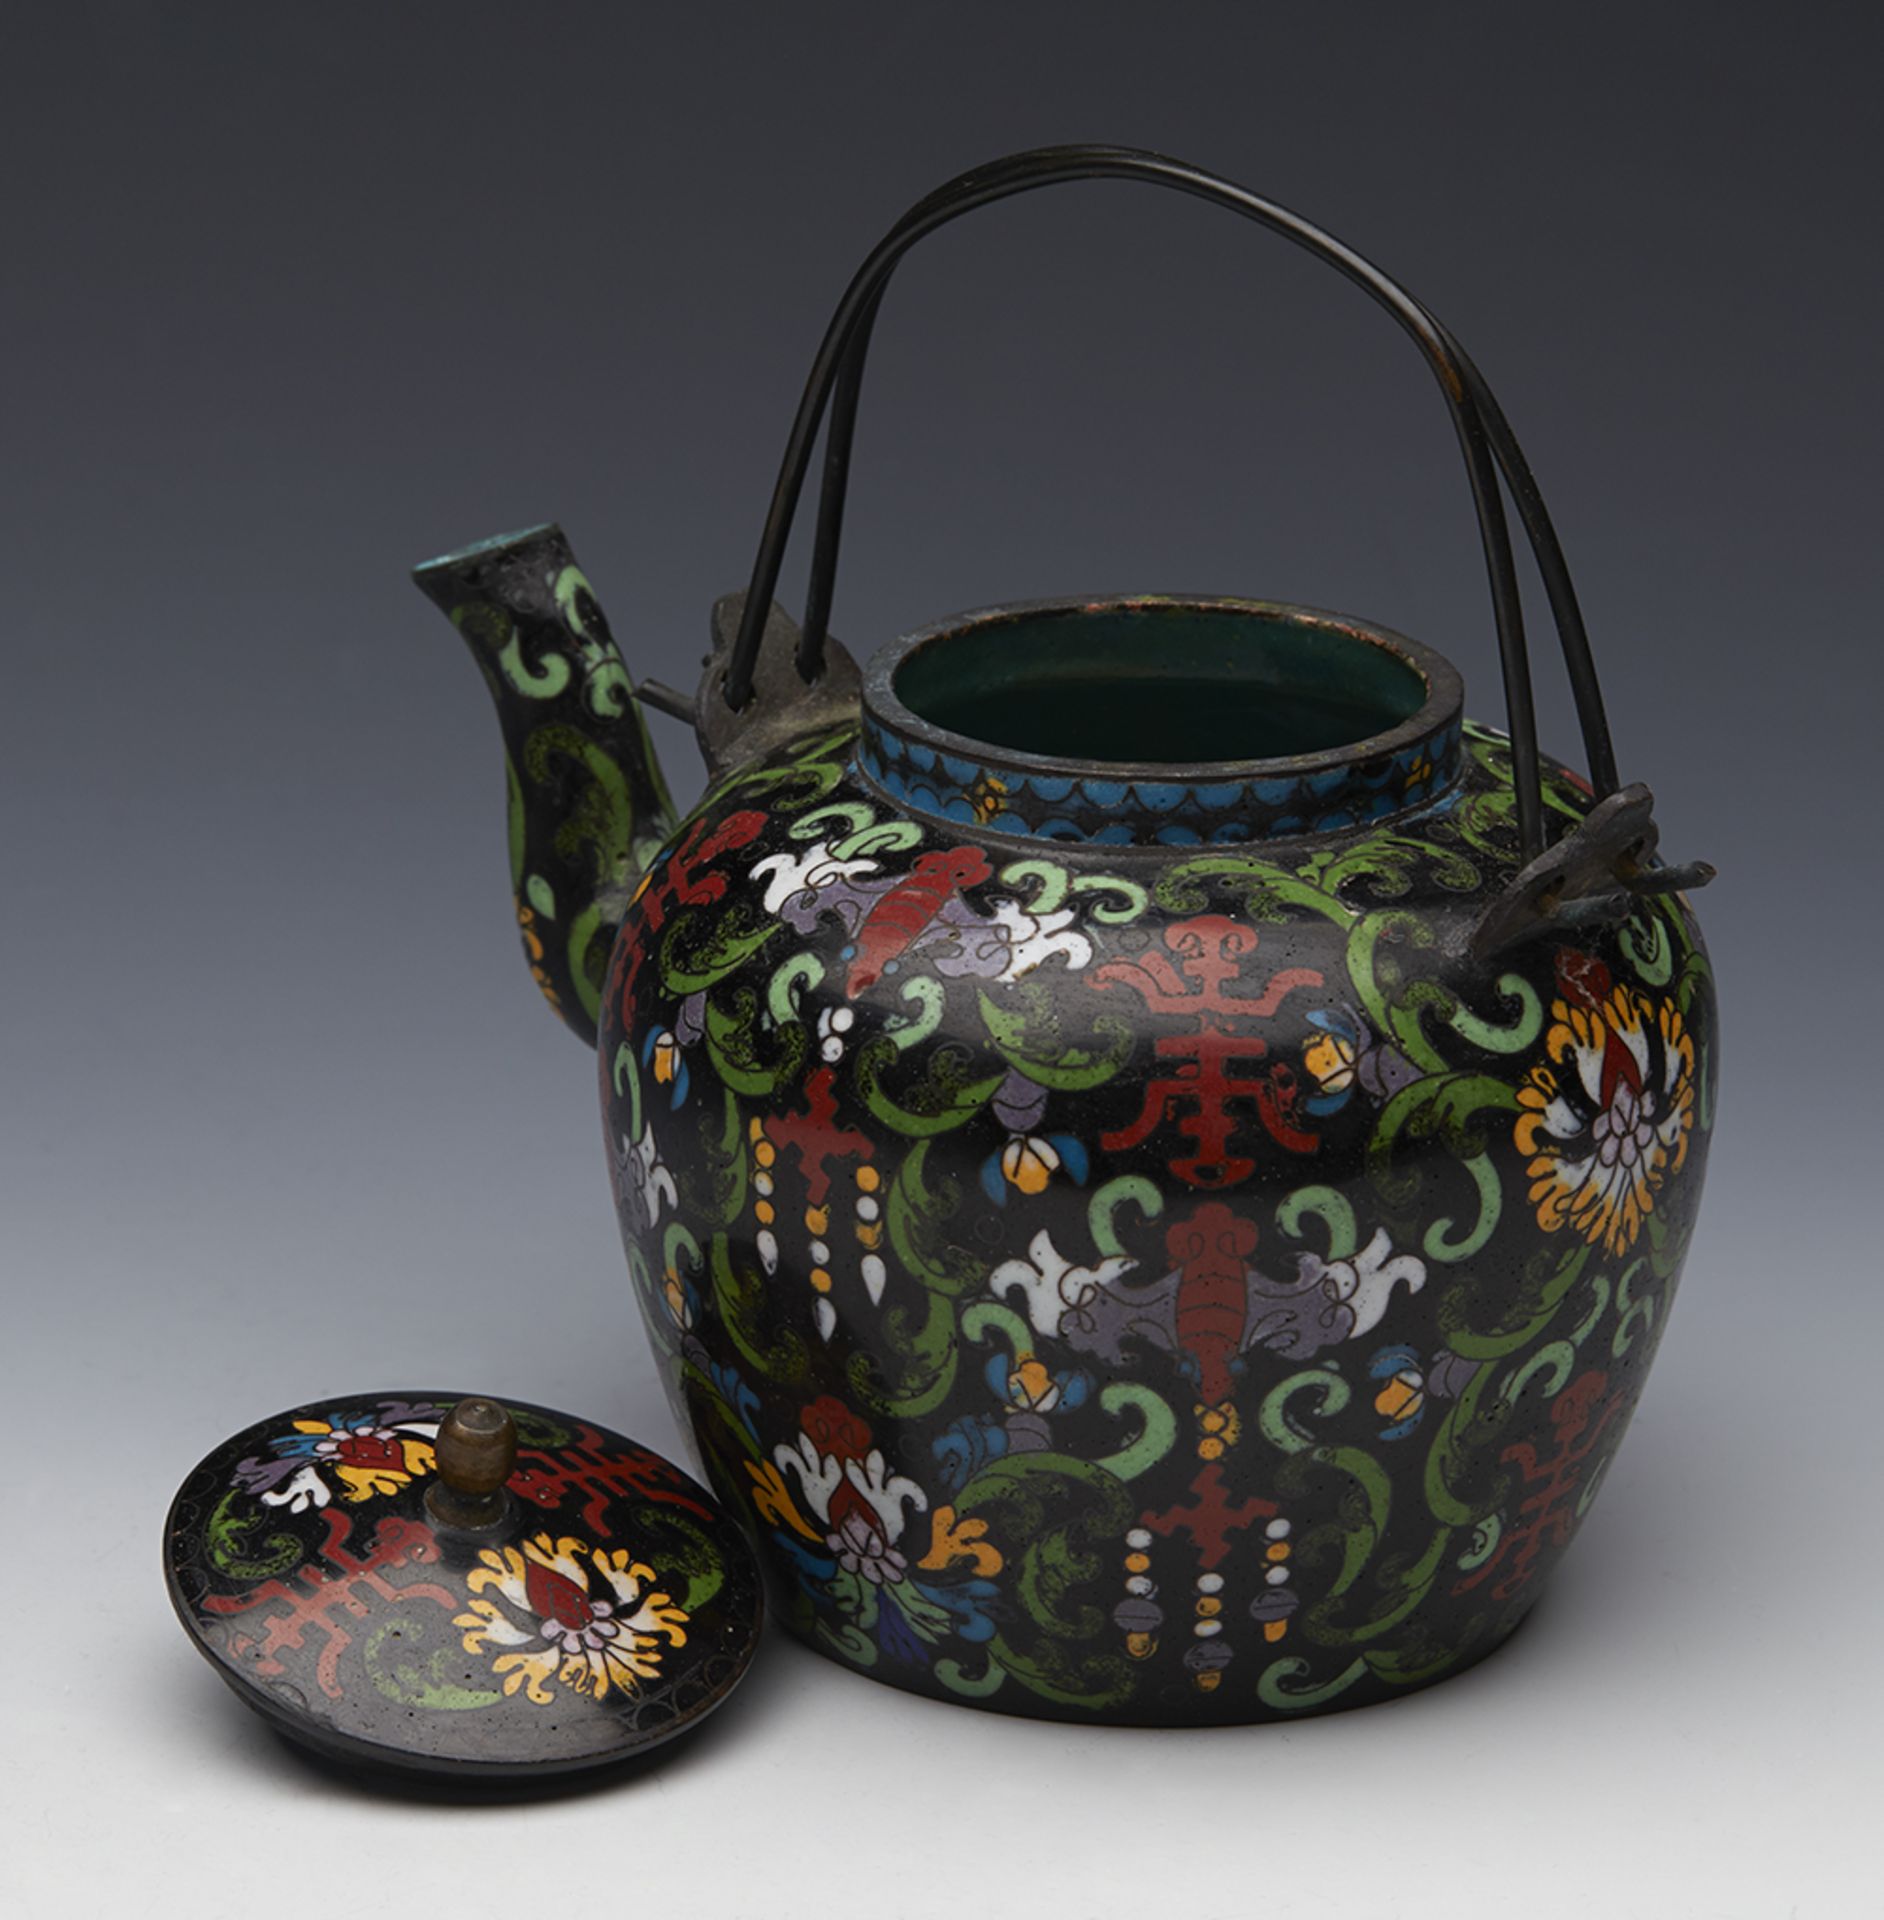 Fine Antique Chinese Qing Cloisonne Wine Pot Marked Tong Shun Tang 19Th C. - Image 7 of 10